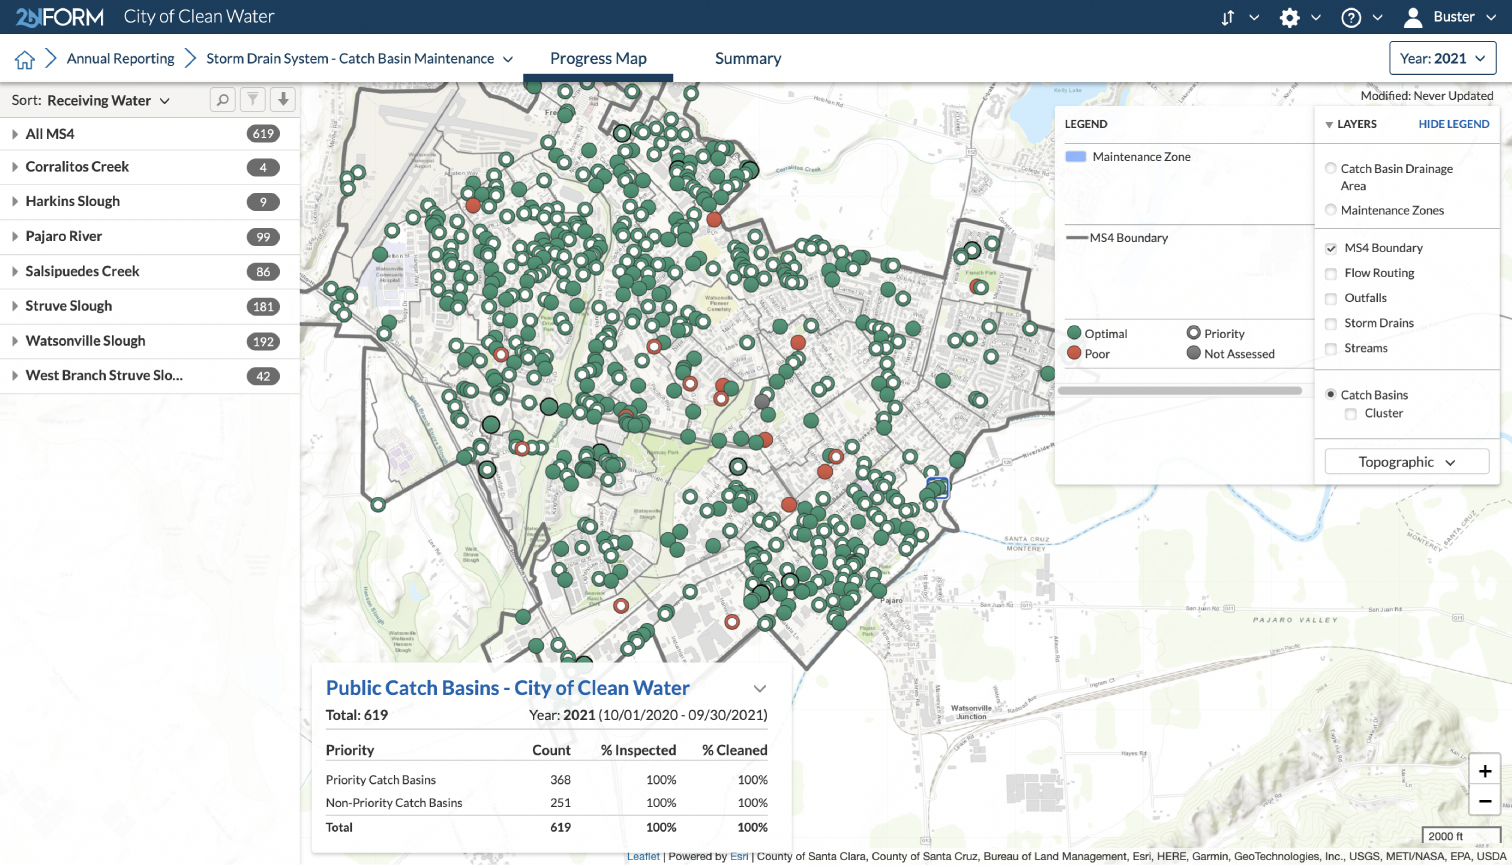 Annual reporting map screenshot in 2NFORM stormwater compliance software